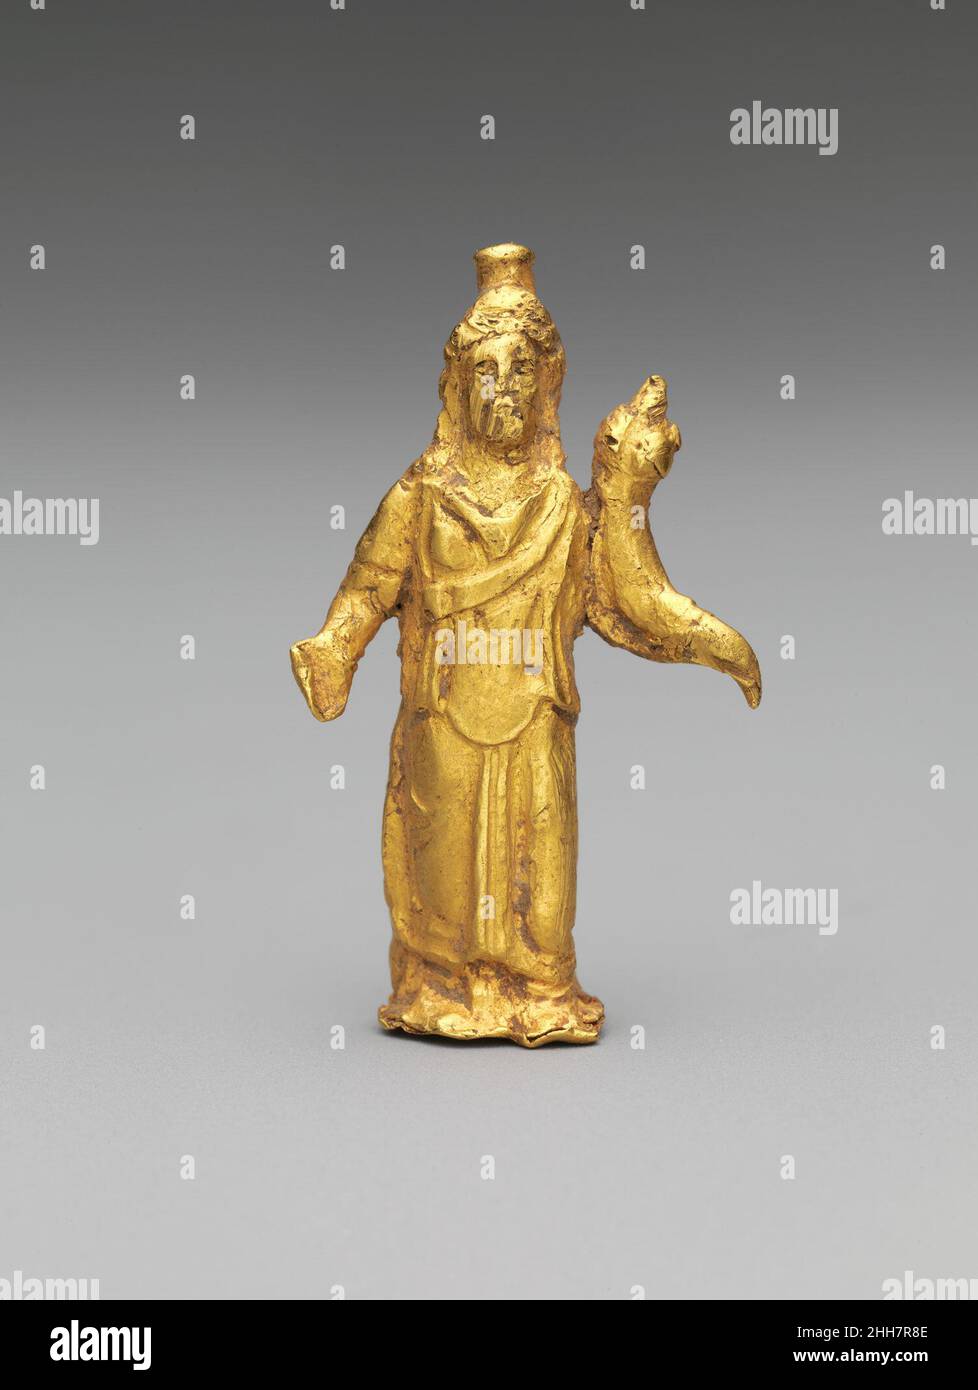 Gold statuette of Zeus Serapis 2nd century A.D. Roman Serapis was essentially a construct of the Ptolemaic Greek rulers of Egypt, a conflation of the local gods Osiris and Apis. Although gradually subsumed into the all-pervading cult of Isis, Serapis was worshipped throughout the Roman world in the guise of Zeus, ruler of the heavens, or that of Hades, god of the Underworld. This small figure wears the Egyptian modius (grain measure) headdress and carries a cornucopia (horn of plenty) to symbolize a plentiful food supply.. Gold statuette of Zeus Serapis. Roman. 2nd century A.D.. Gold. Mid-Impe Stock Photo